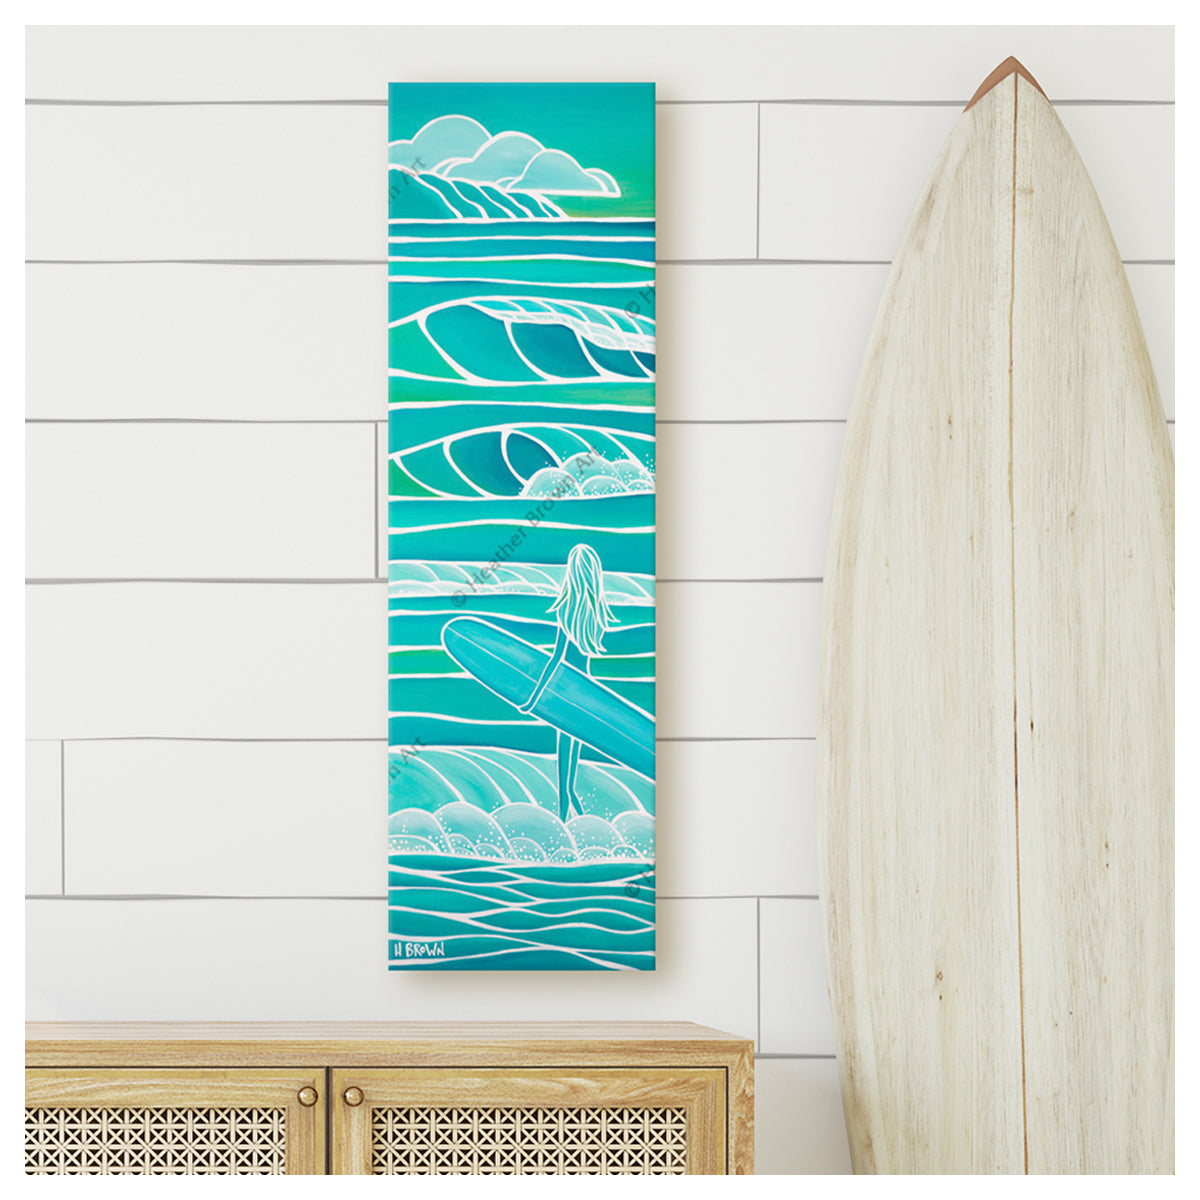 Spring Swell by Hawaii surf artist Heather Brown Canvas Giclée